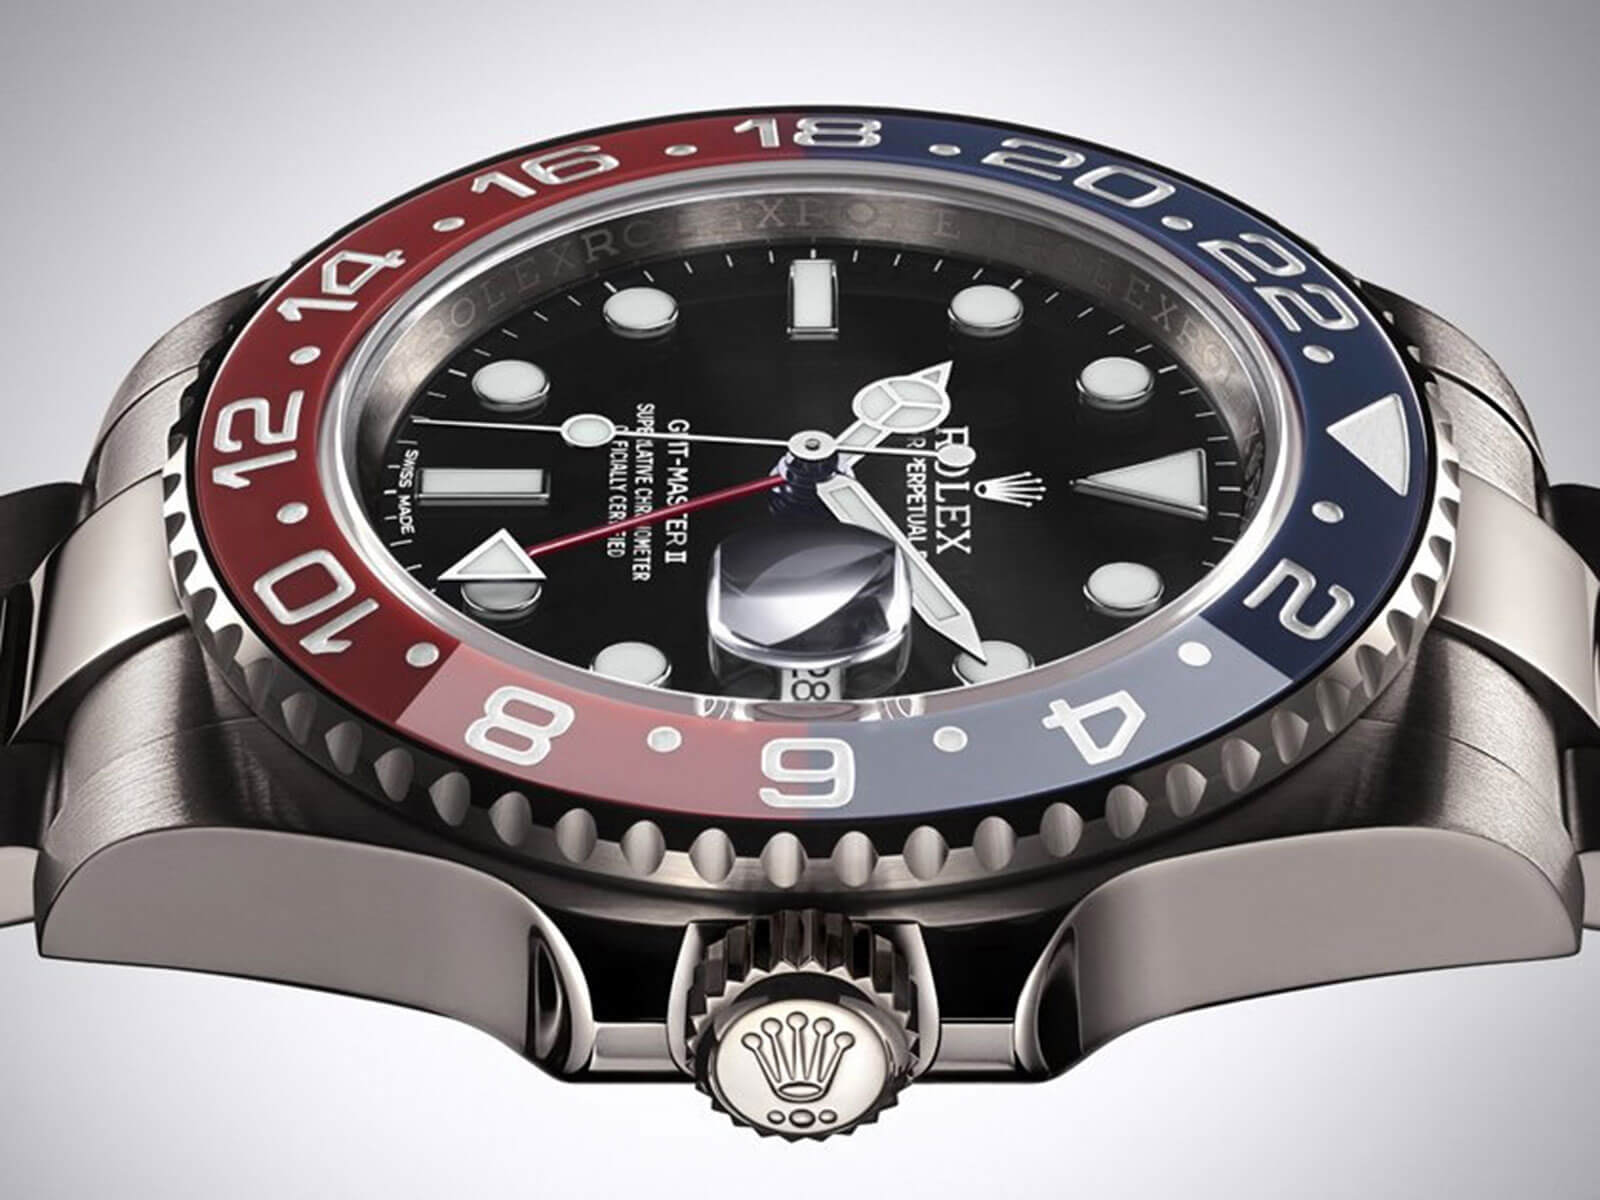 Rolex GMT-Master II 116719BLRO is the first Rolex model with the Blue-Red Cerachrom Bezel